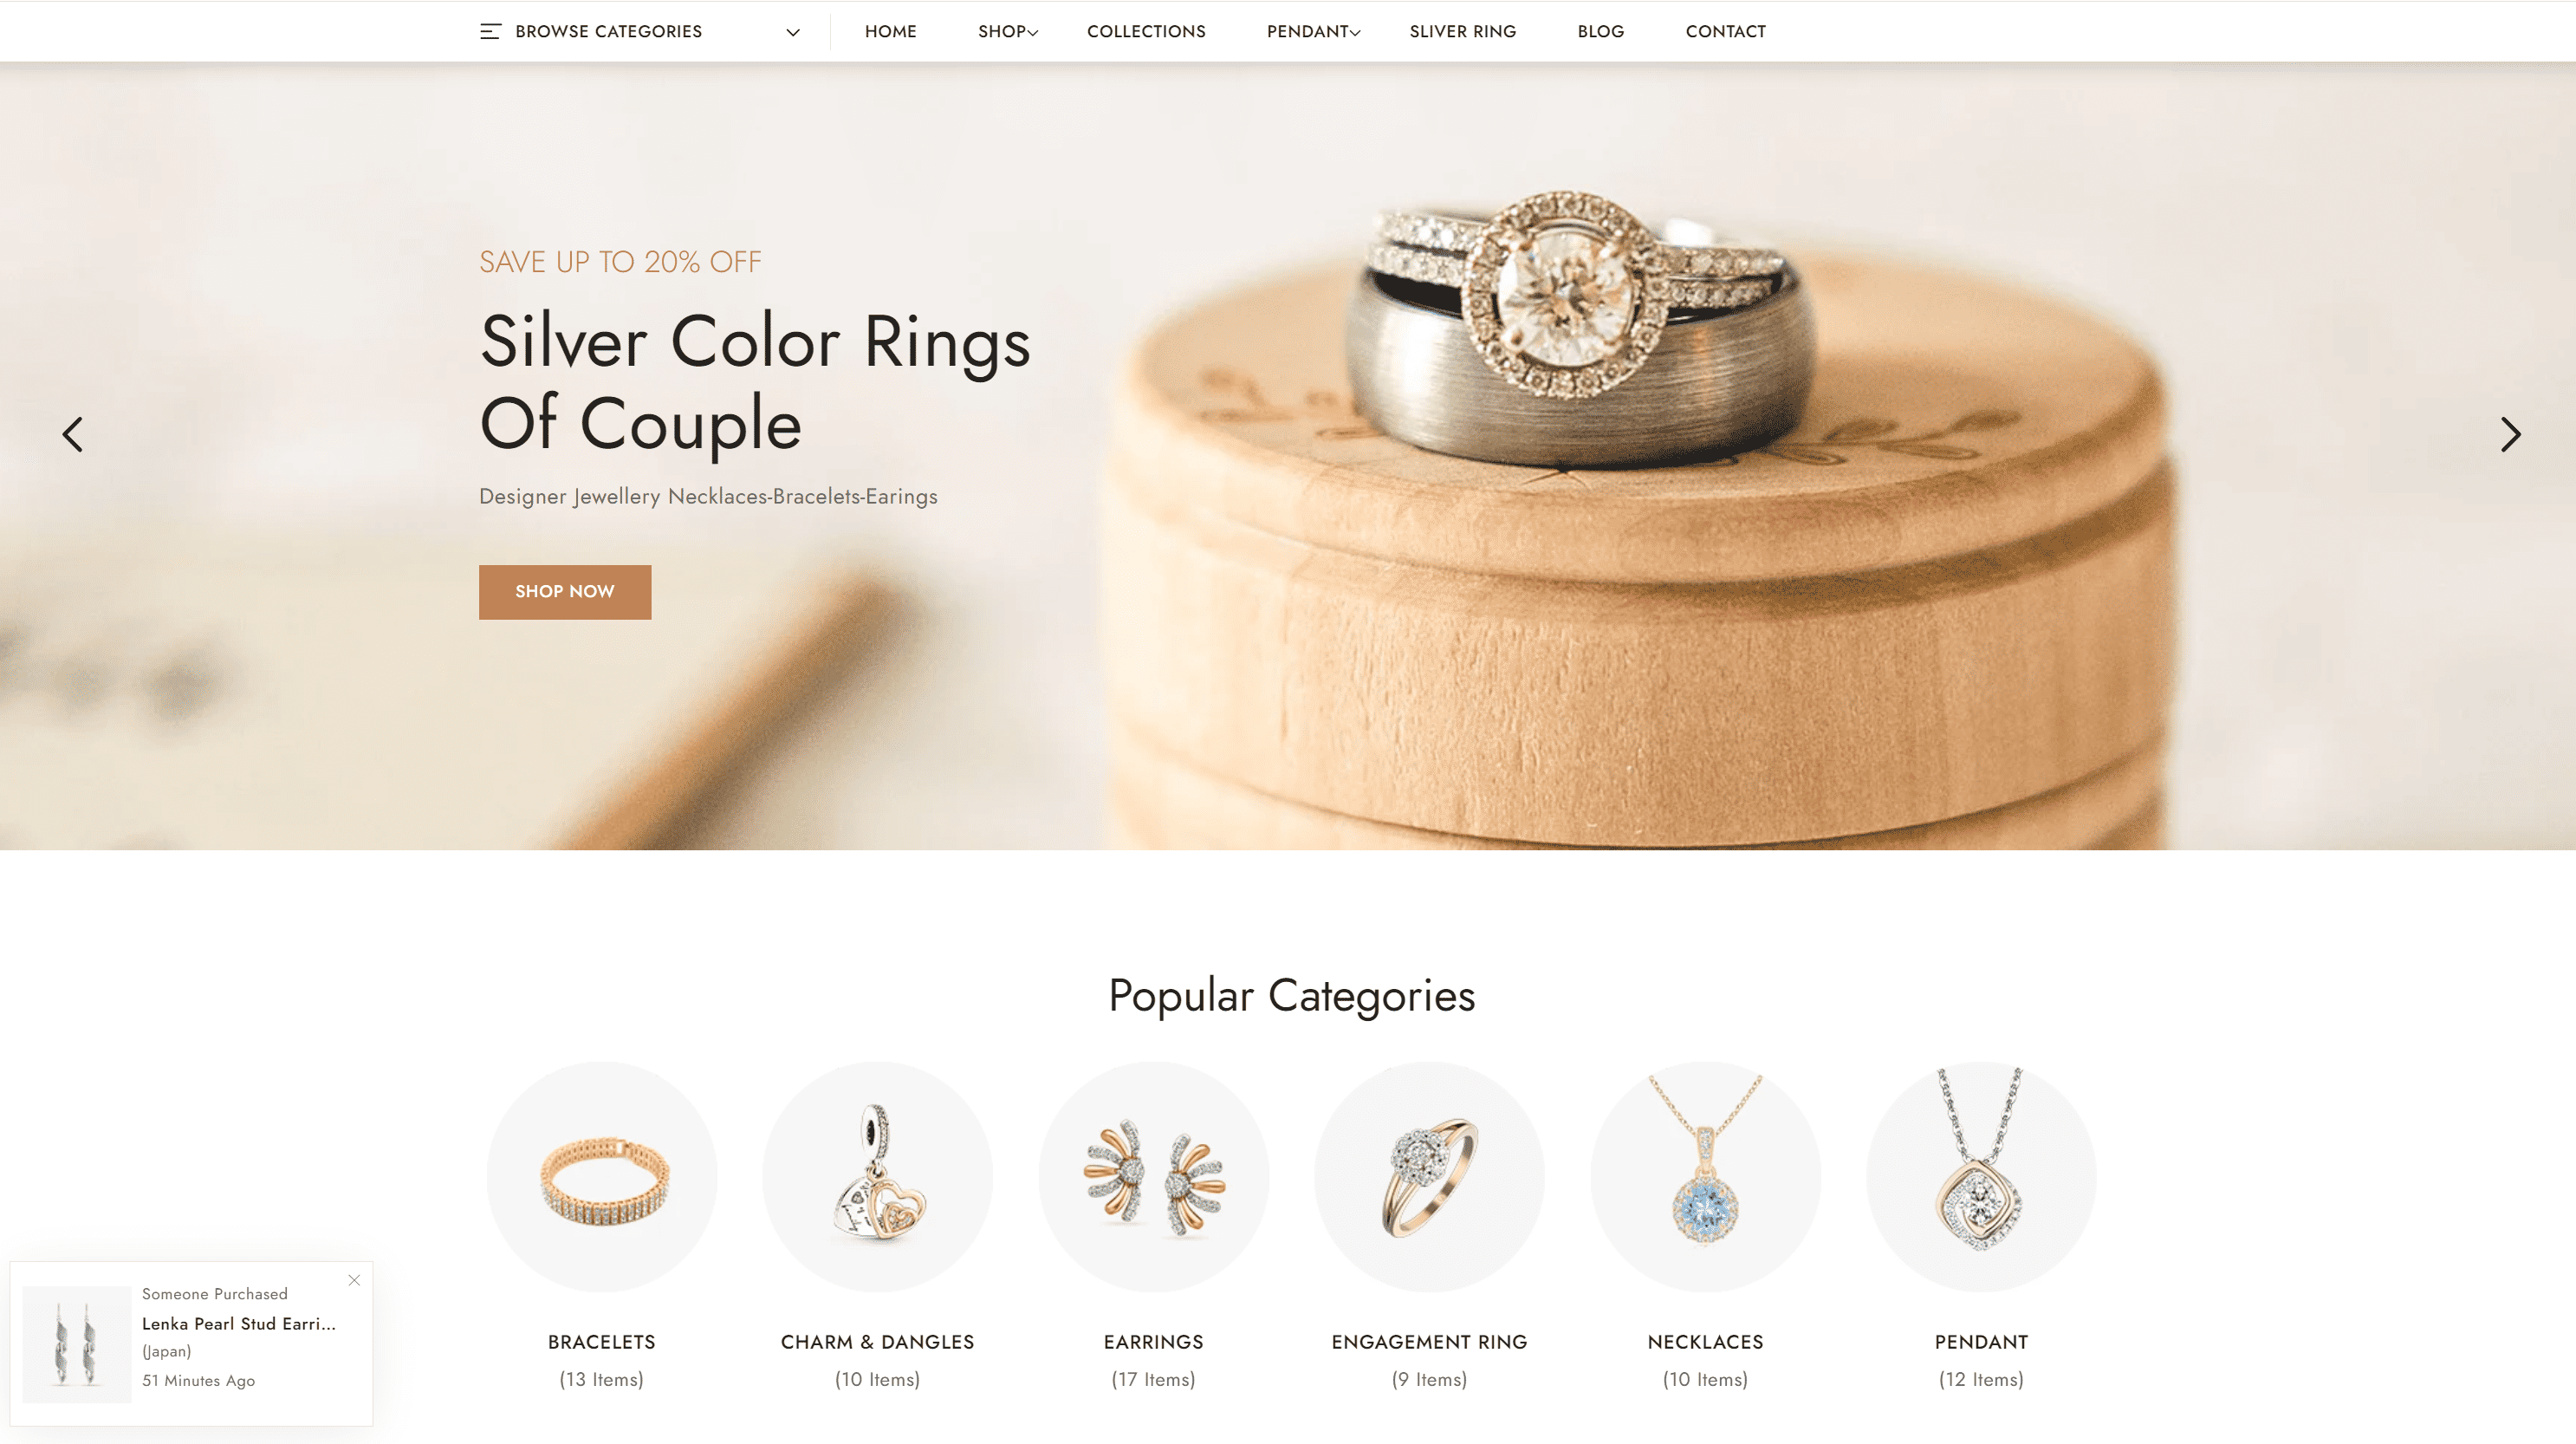 Shopify eCommerce store for women's jewelry